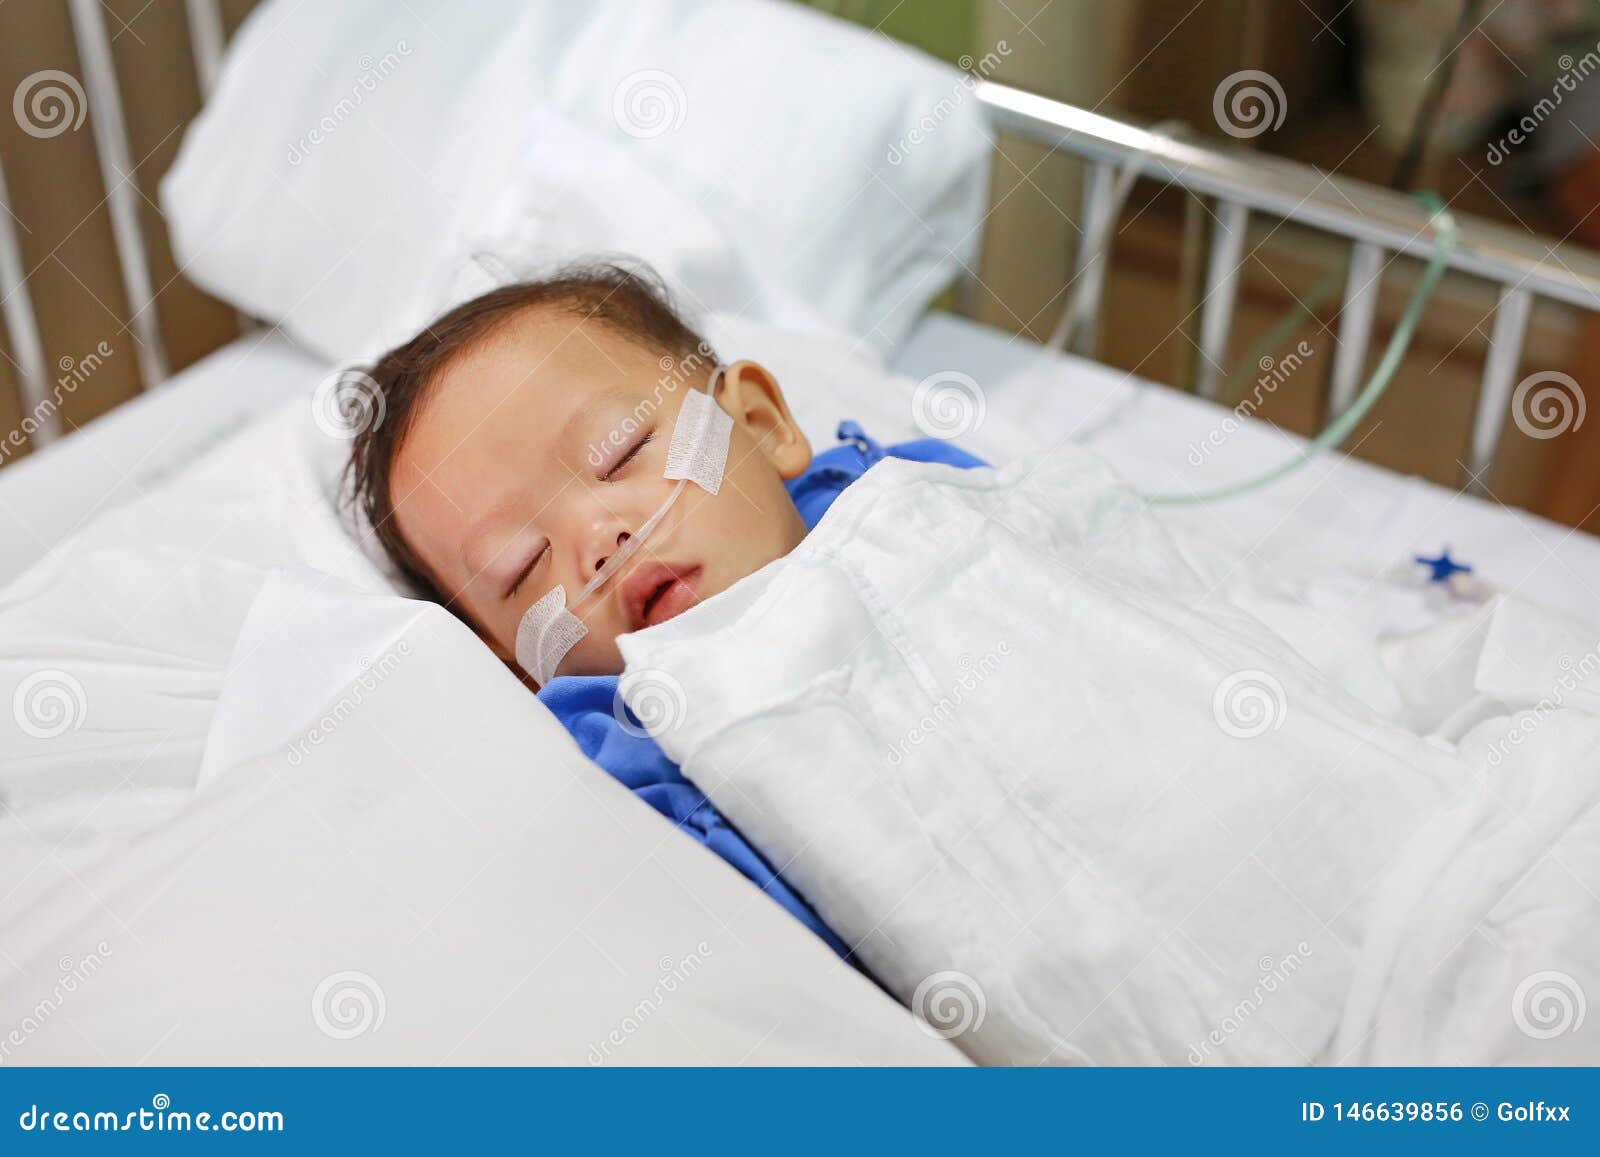 baby boy age about 1 year old sleeping on patient bed with getting oxygen via nasal prongs to assure oxygen saturation. intensive